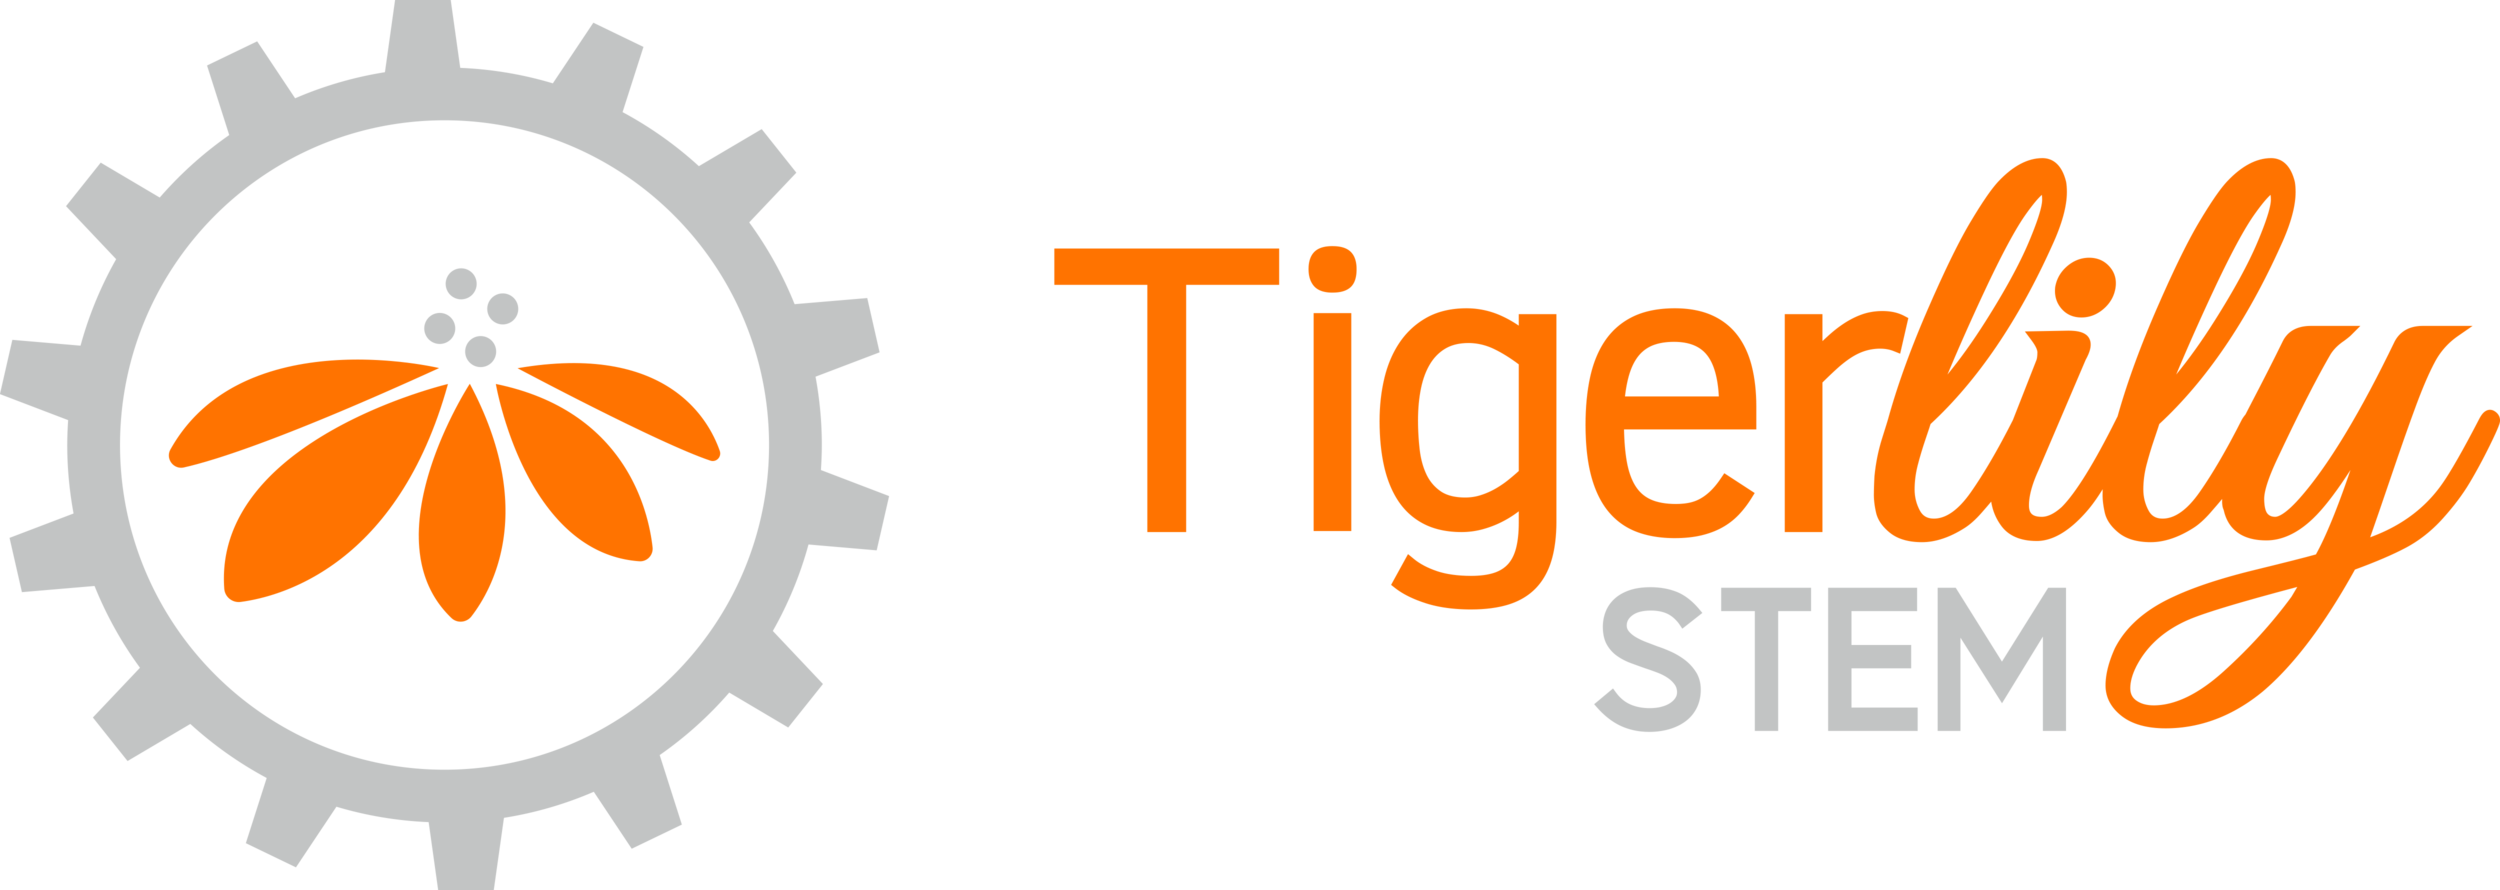 TigerLily STEM - Tutoring &amp; Classes in Des Moines, IA